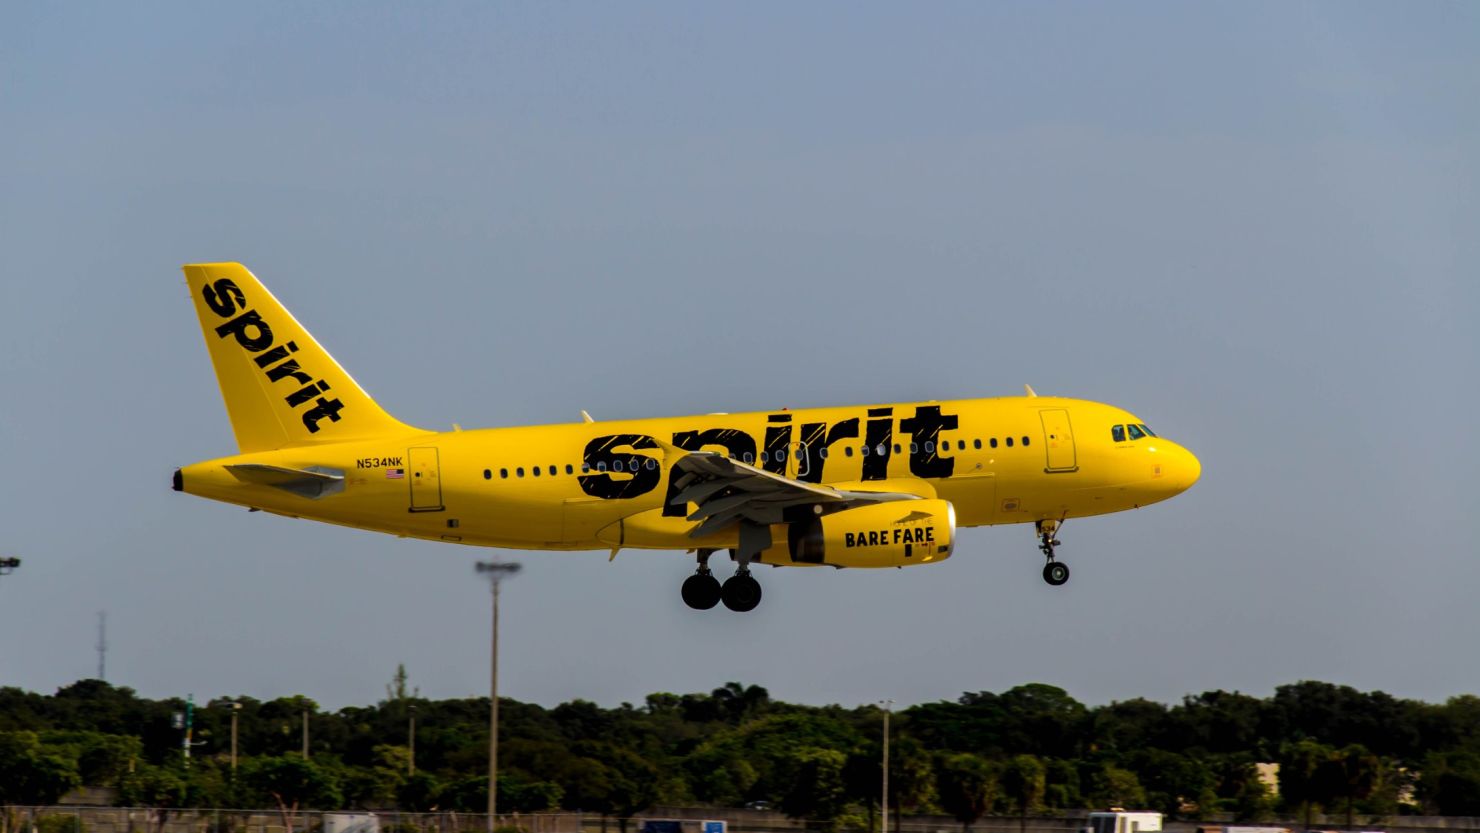 Brian J. Halye had flown with Spirit Airlines for nine years